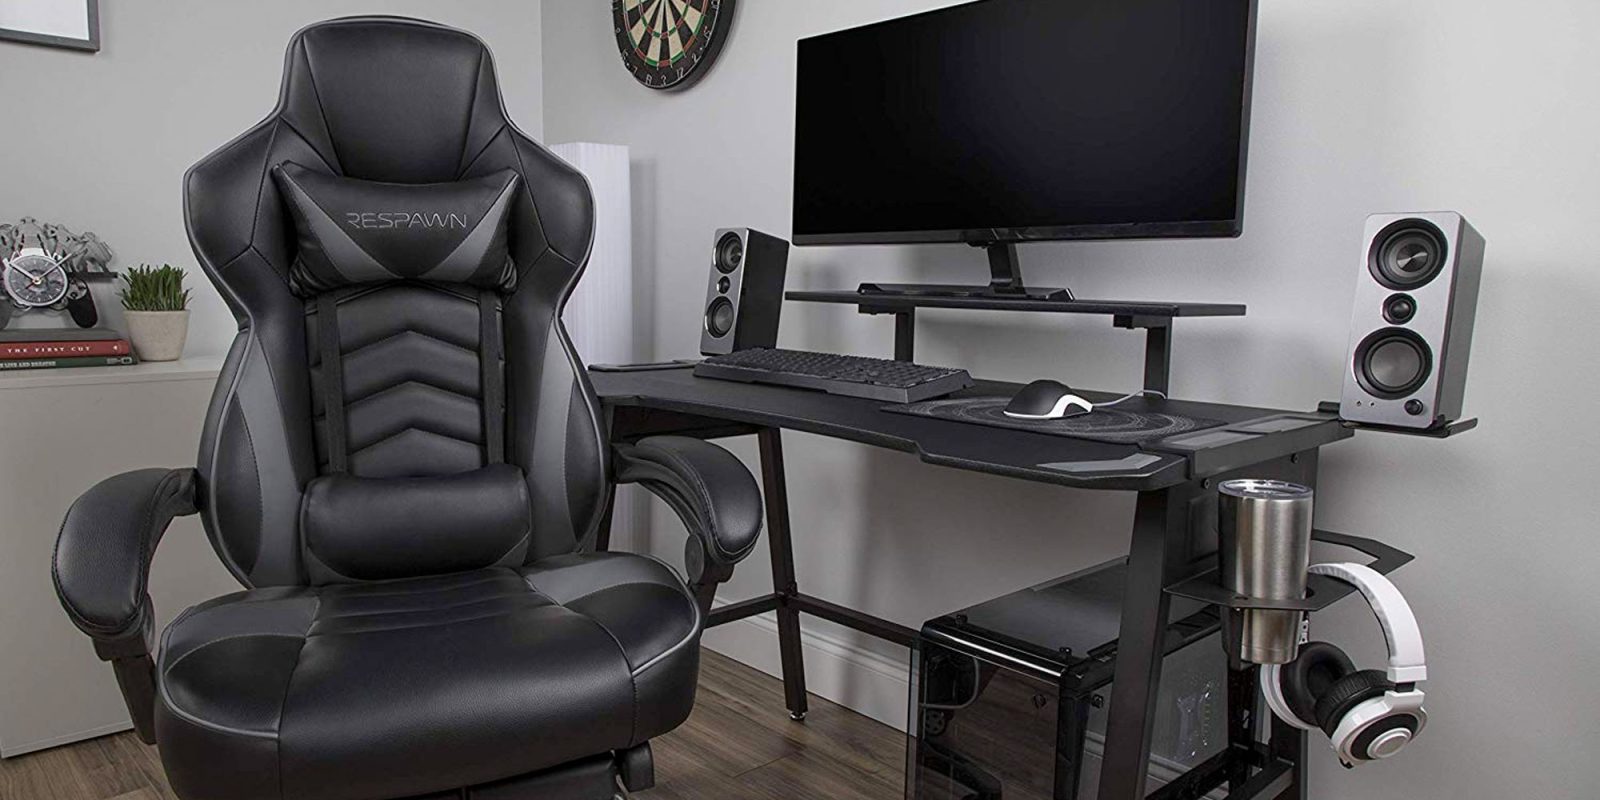 Alleviate Long Gaming Session Fatigue With This 90 Racing Chair